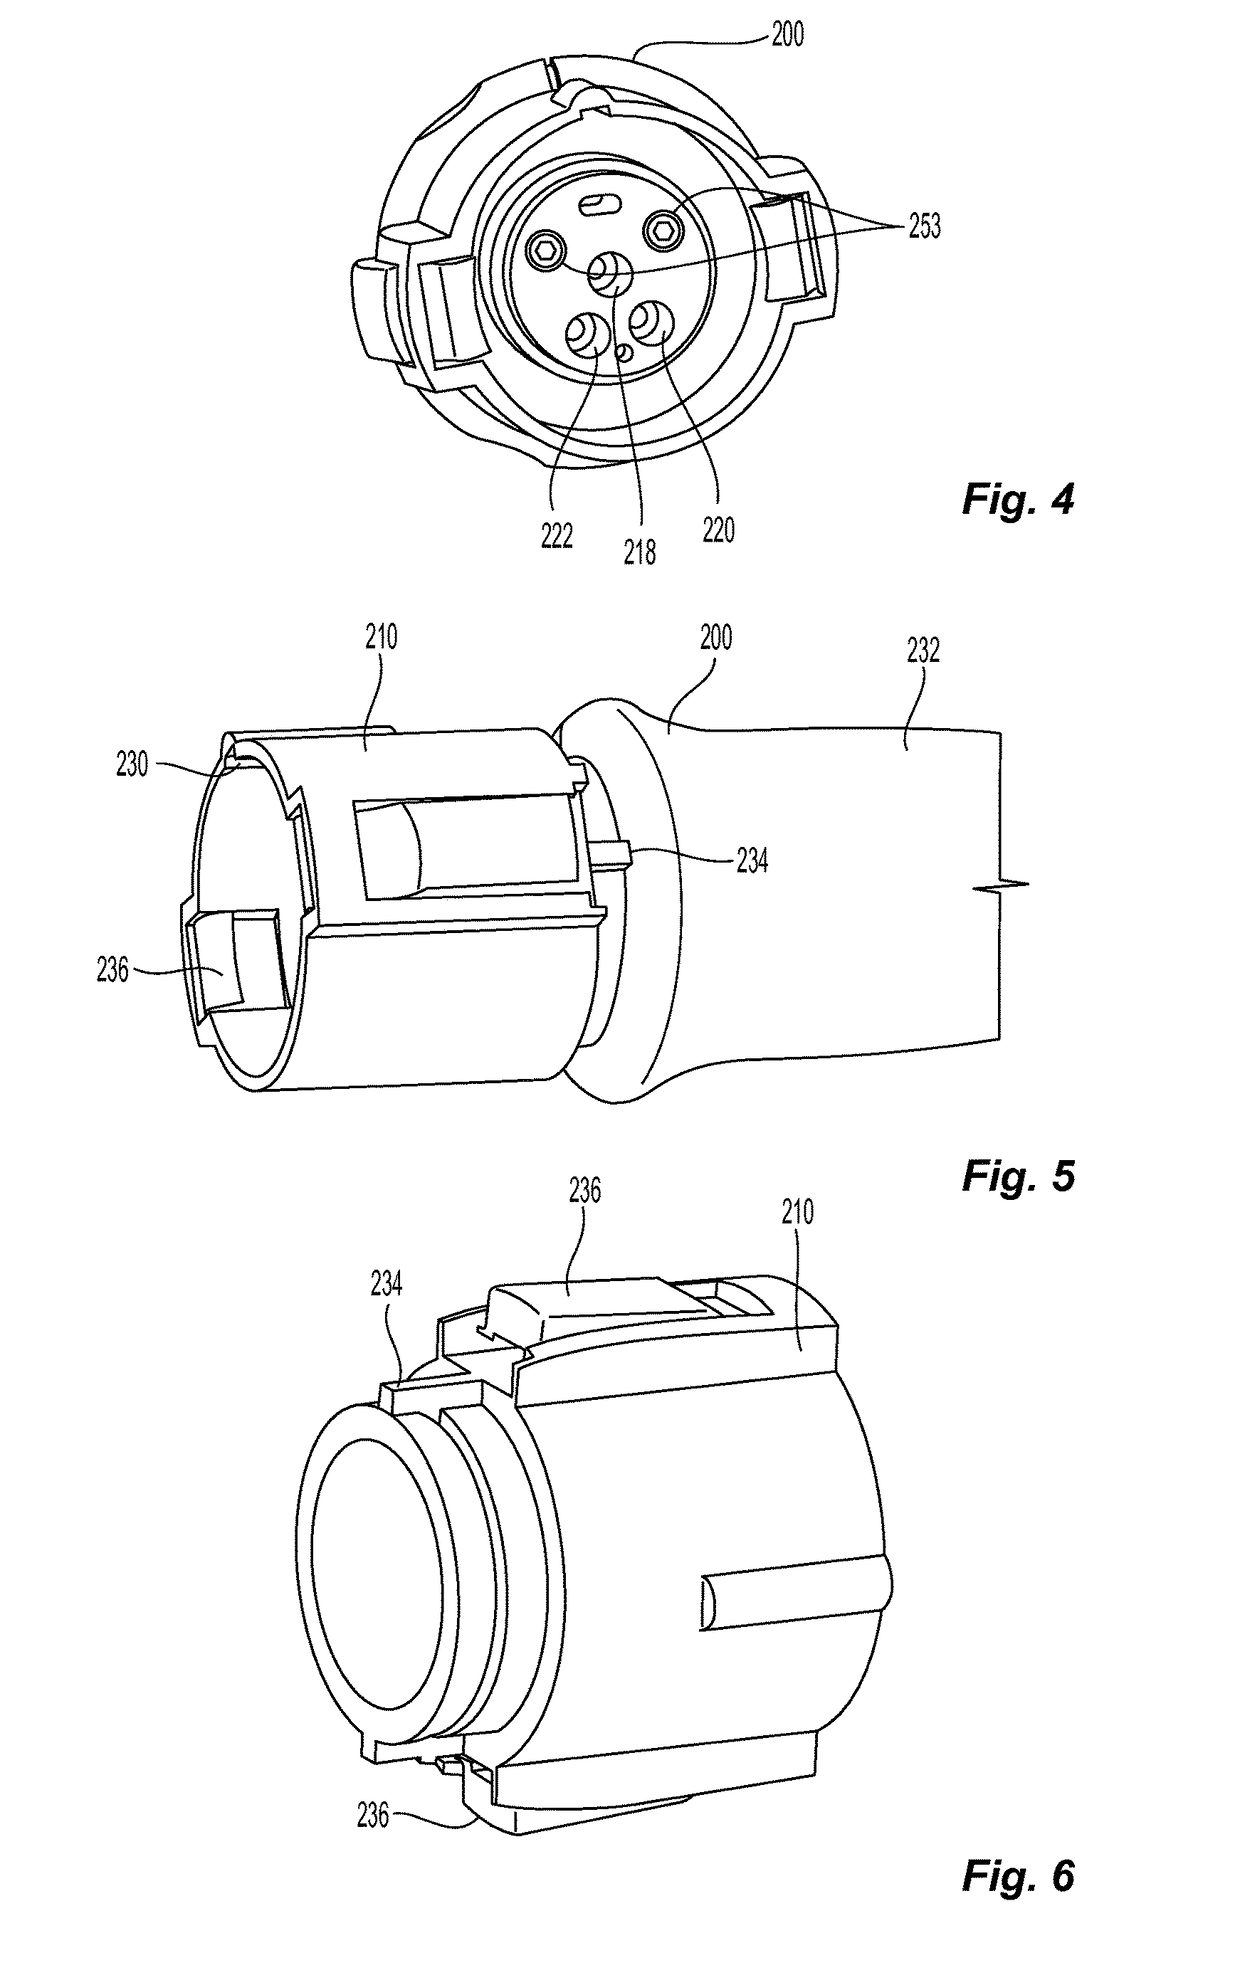 Adapter direct drive with manual retraction, lockout, and connection mechanisms for improper use prevention